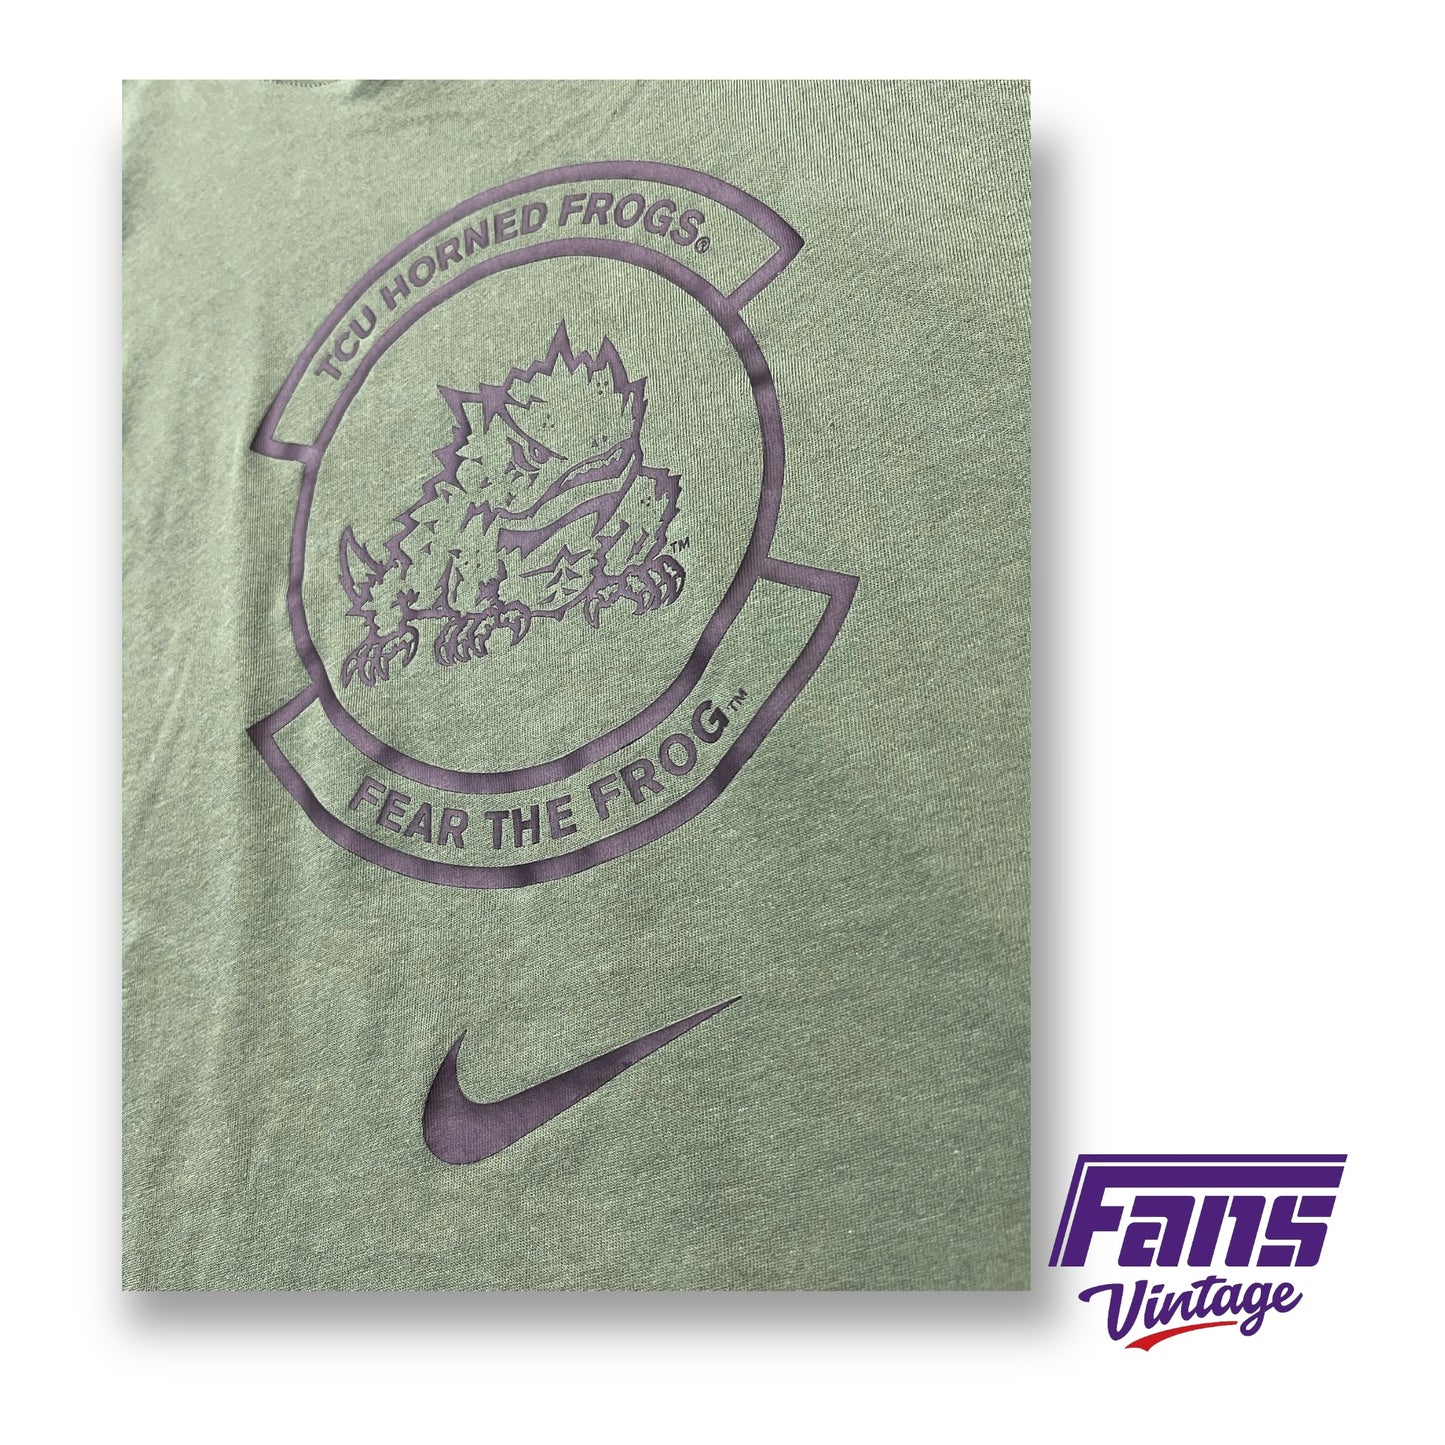 TCU Football Veteran’s Day Team Issue Nike Hoodie Long Sleeve Tee with awesome patches!